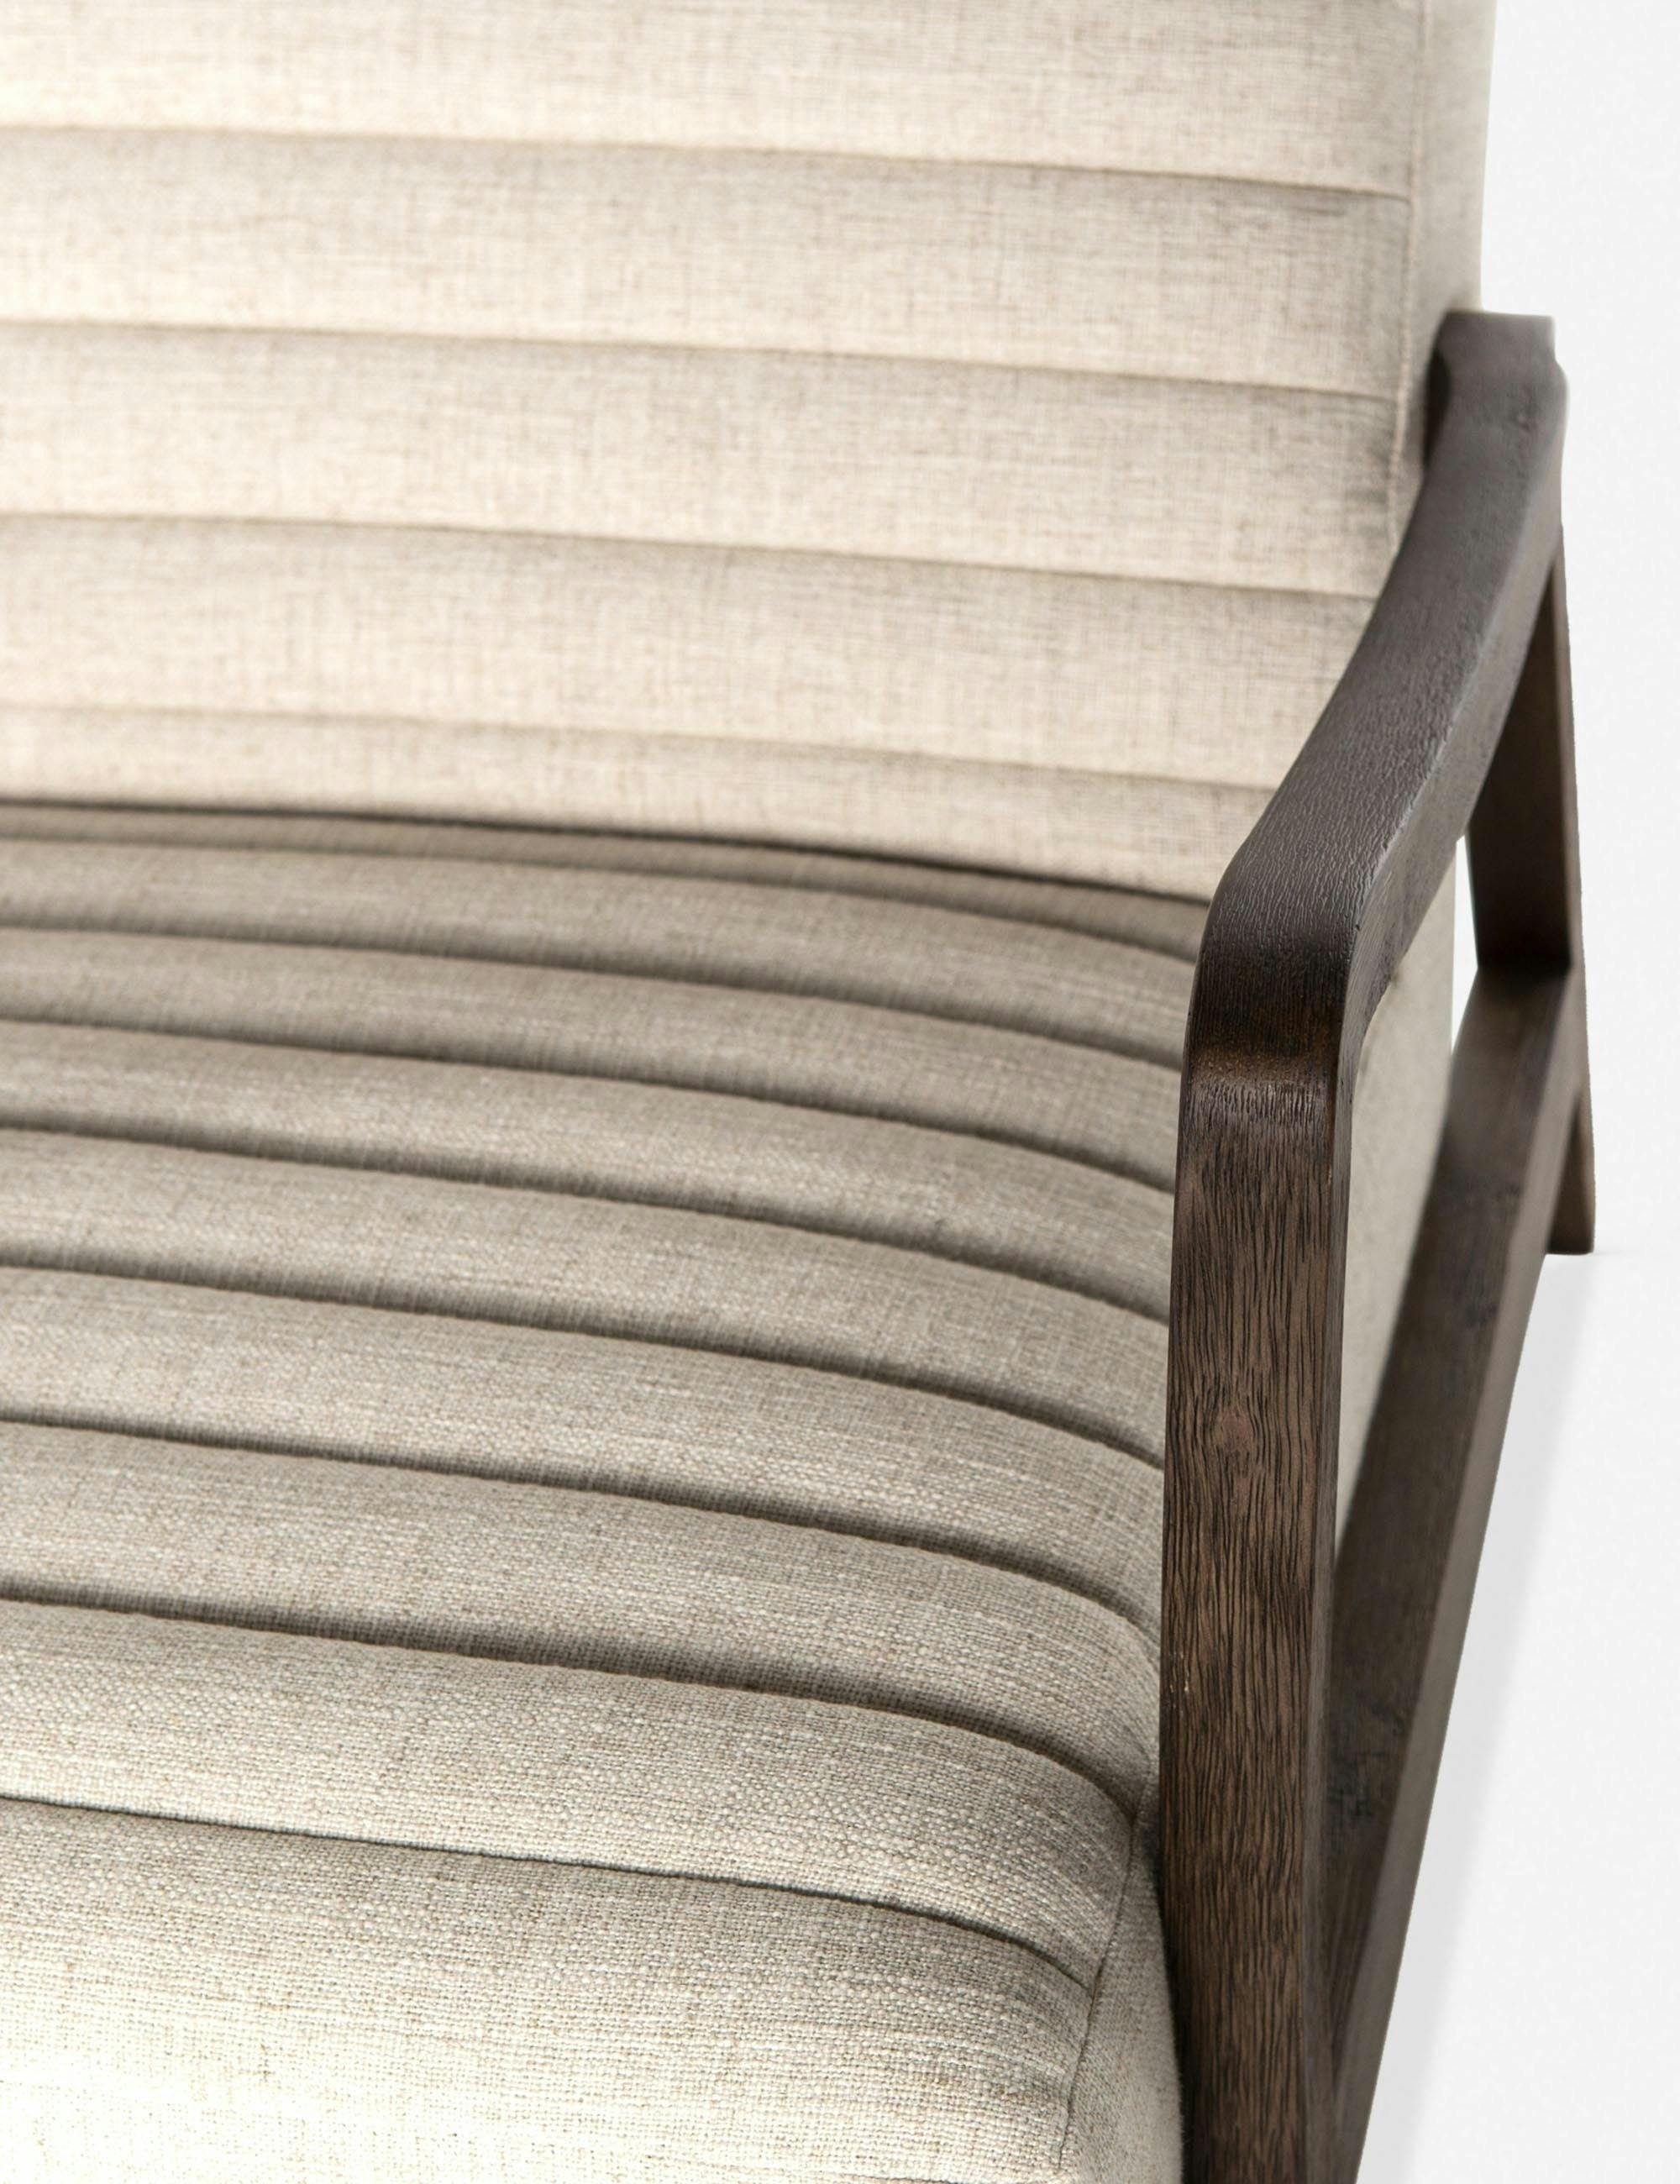 27'' Cream Contemporary Linen and Leather Accent Chair